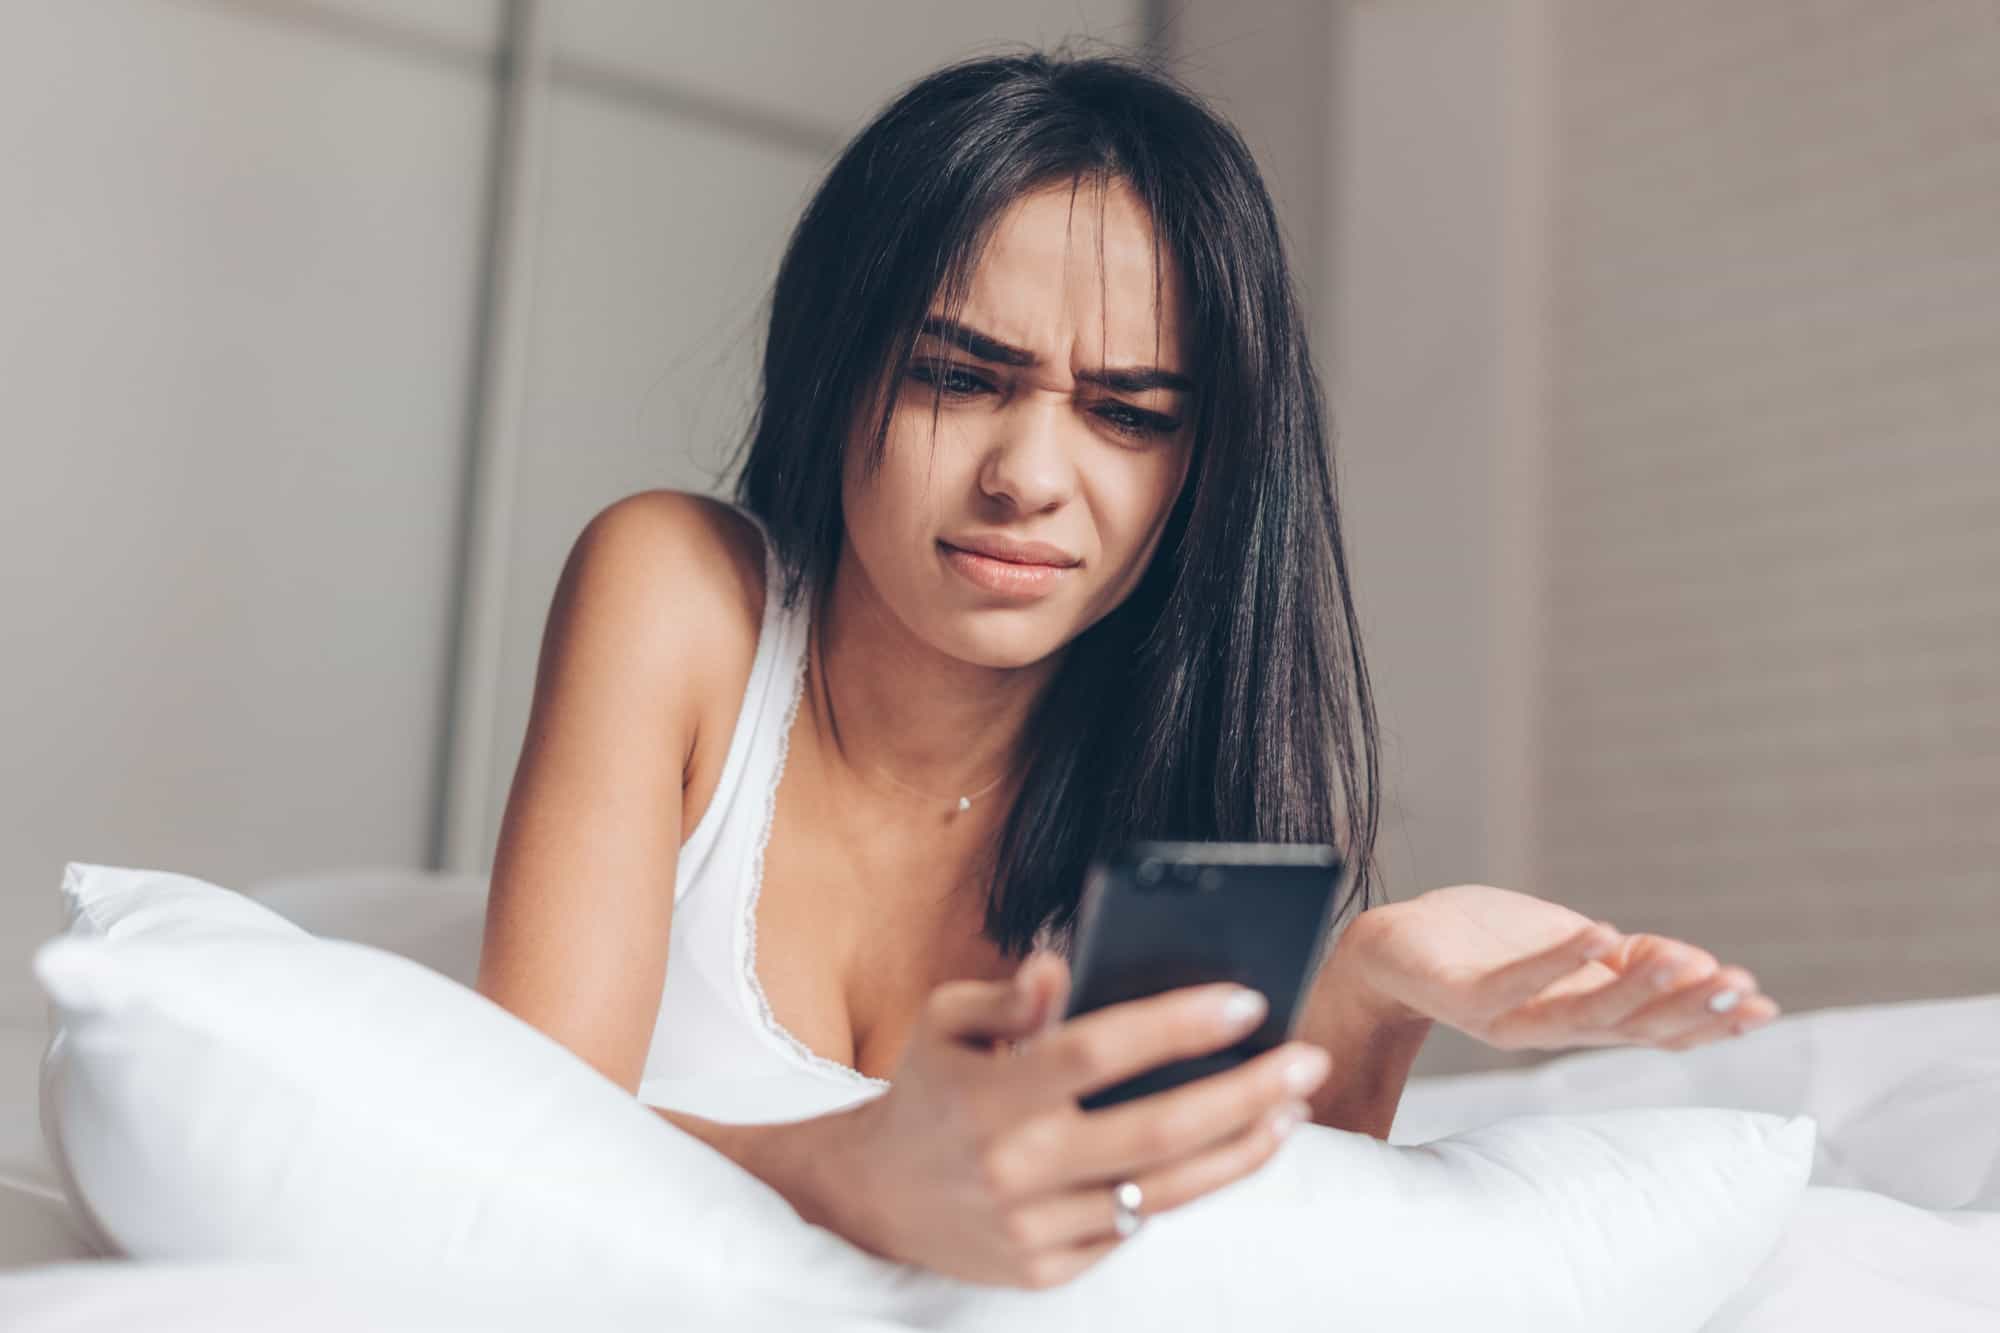 Annoyed woman using an online hookup app on her phone.